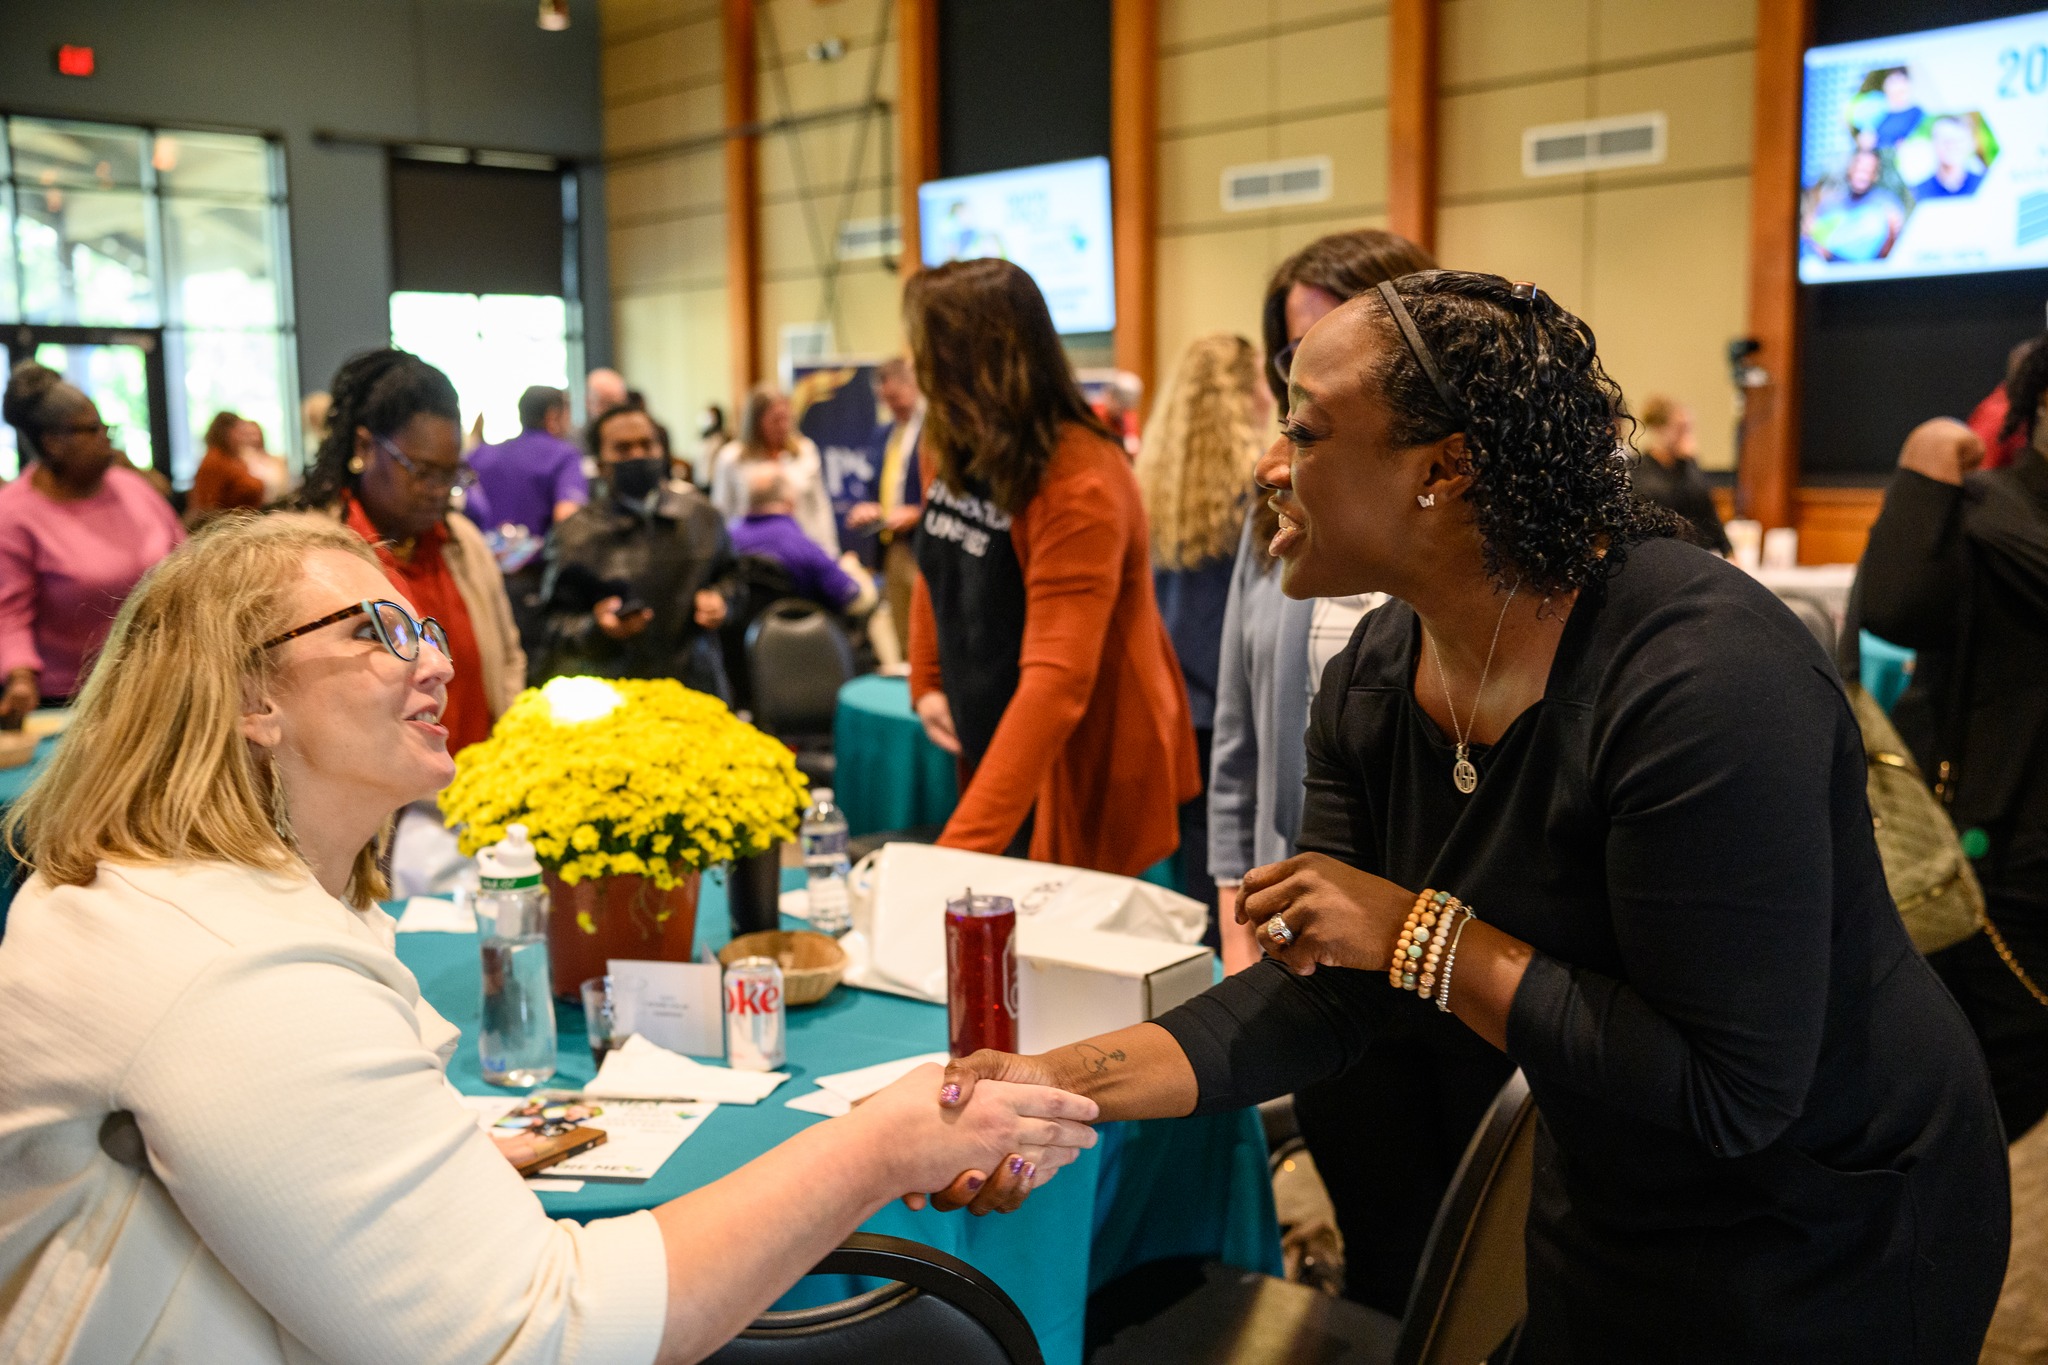 Able SC CEO, Kimberly Tissot, shaking hands with Dr. Sharp. Kimberly is a white woman with short blonde hair and glasses using crutches. Dr. Sharp is a black woman with short curly hair.